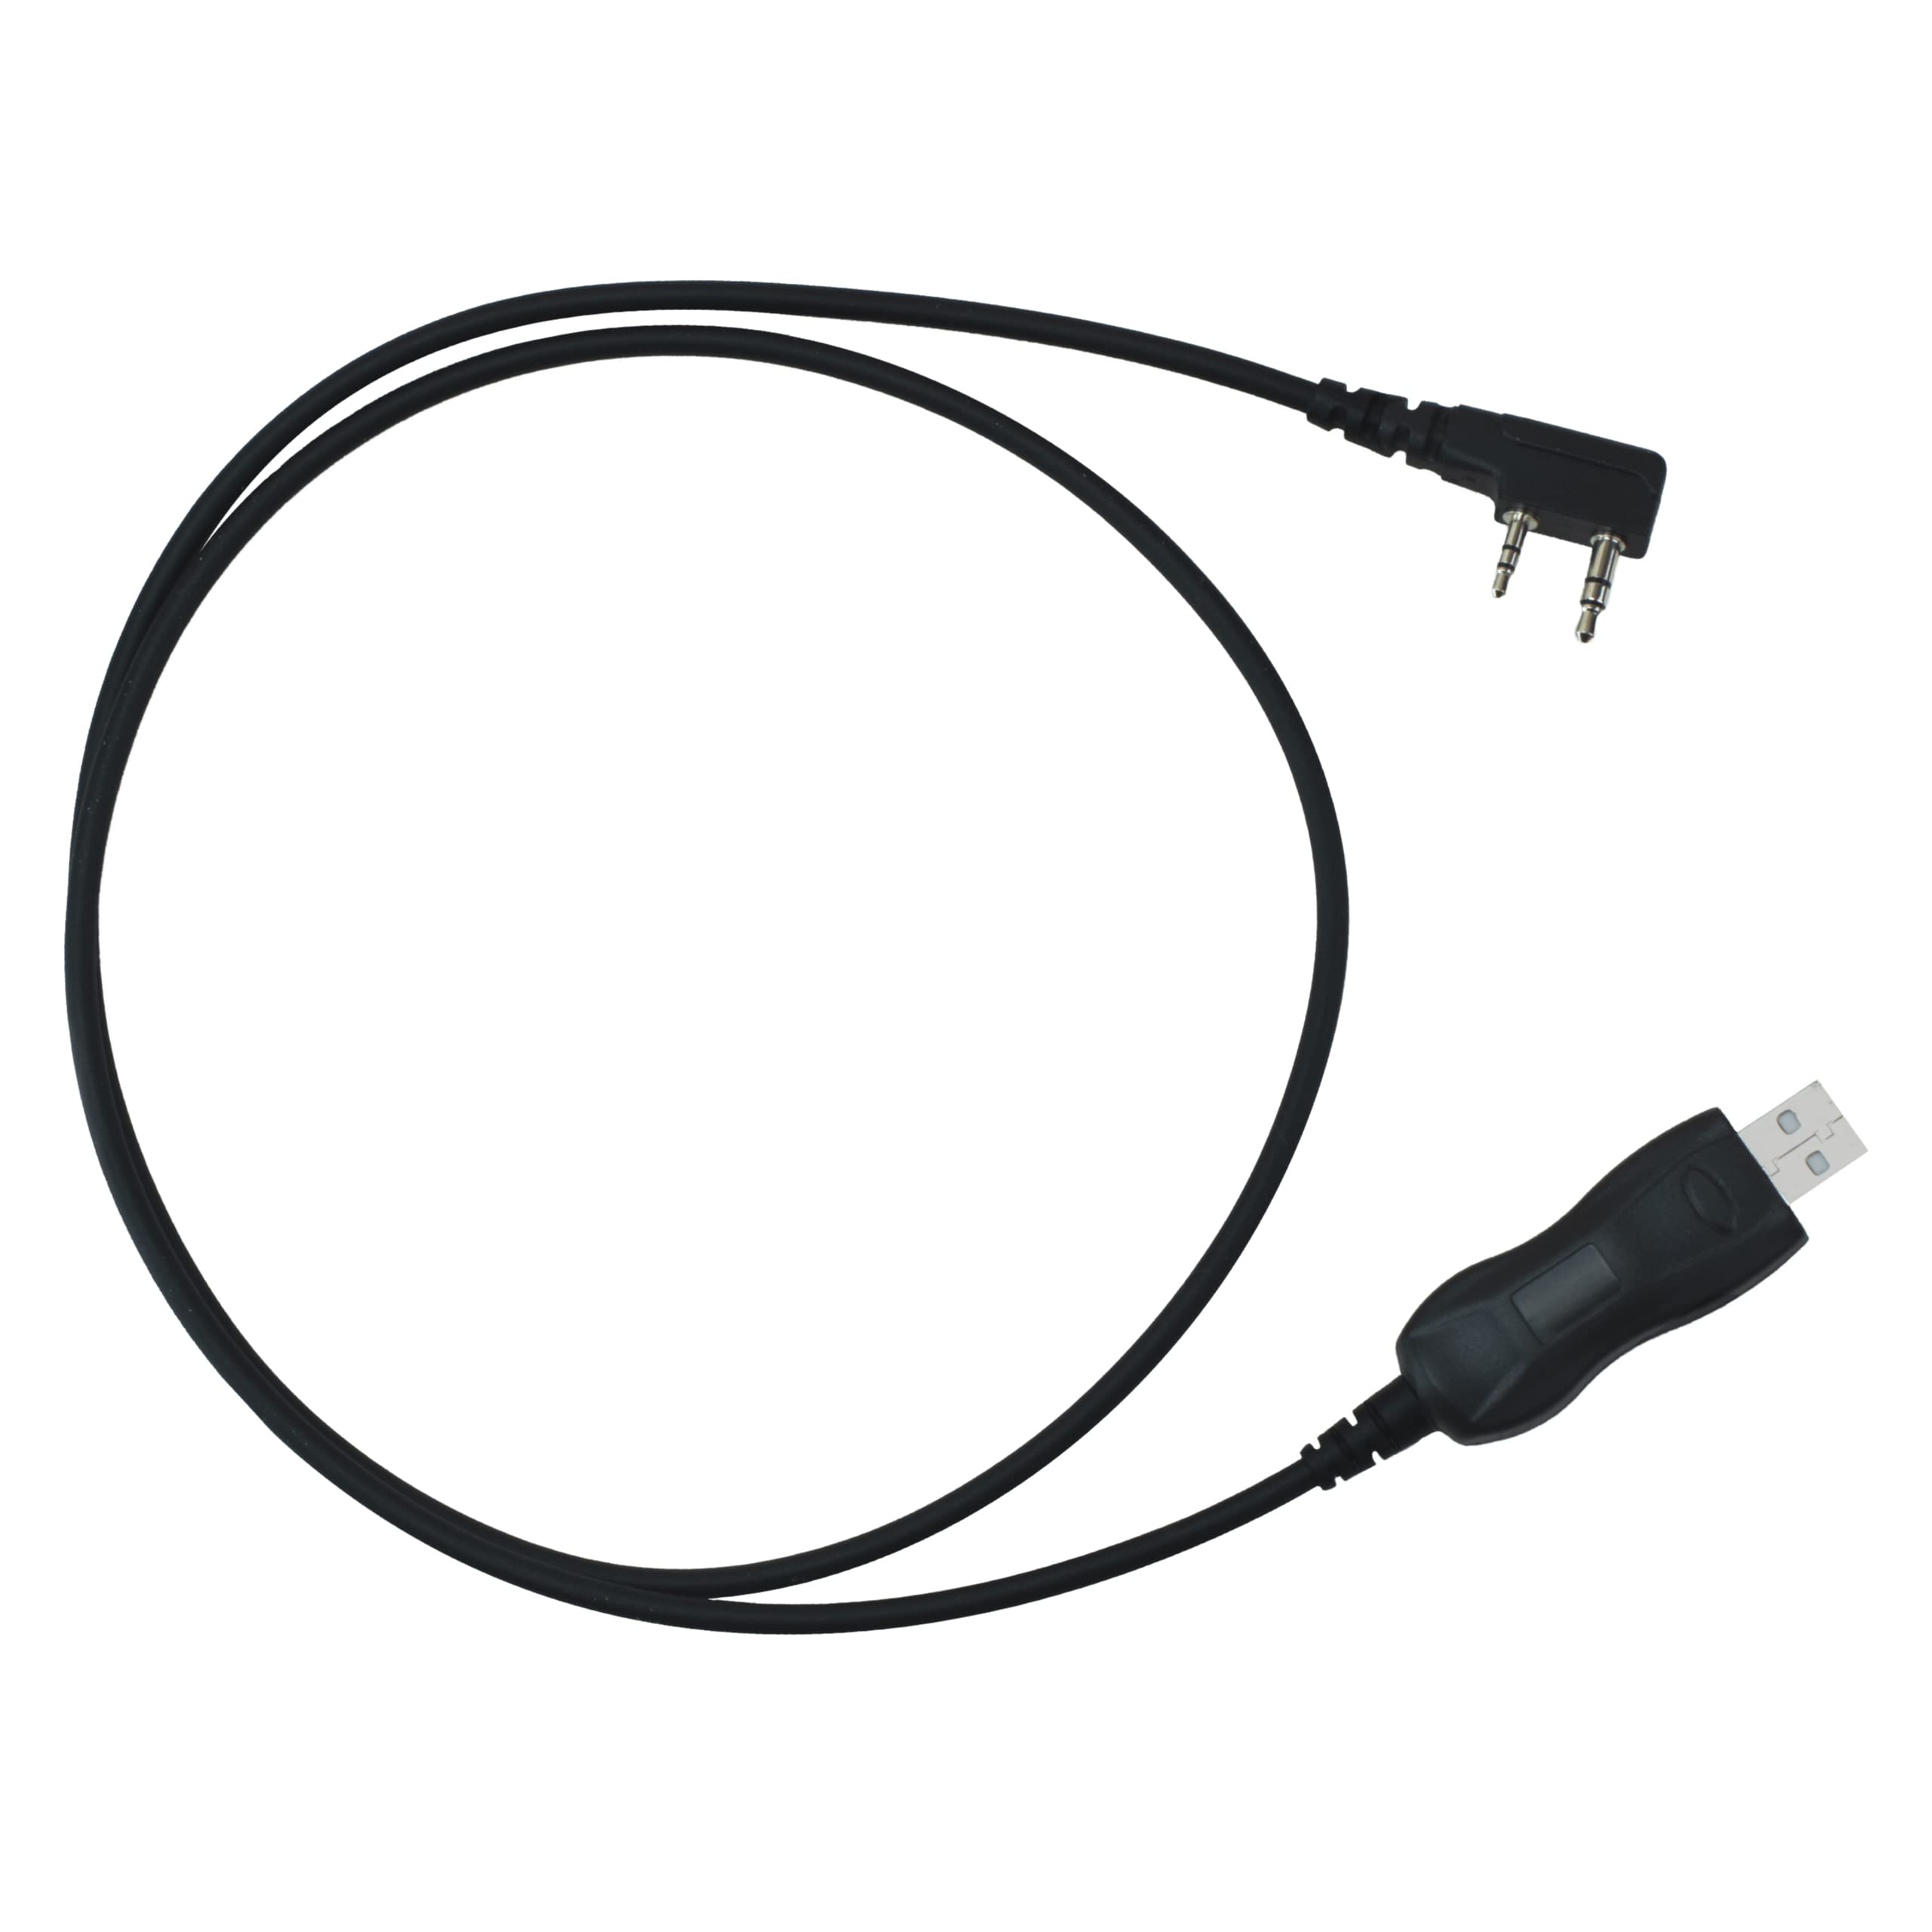 BTECH PC03 Universal USB Programming Cable